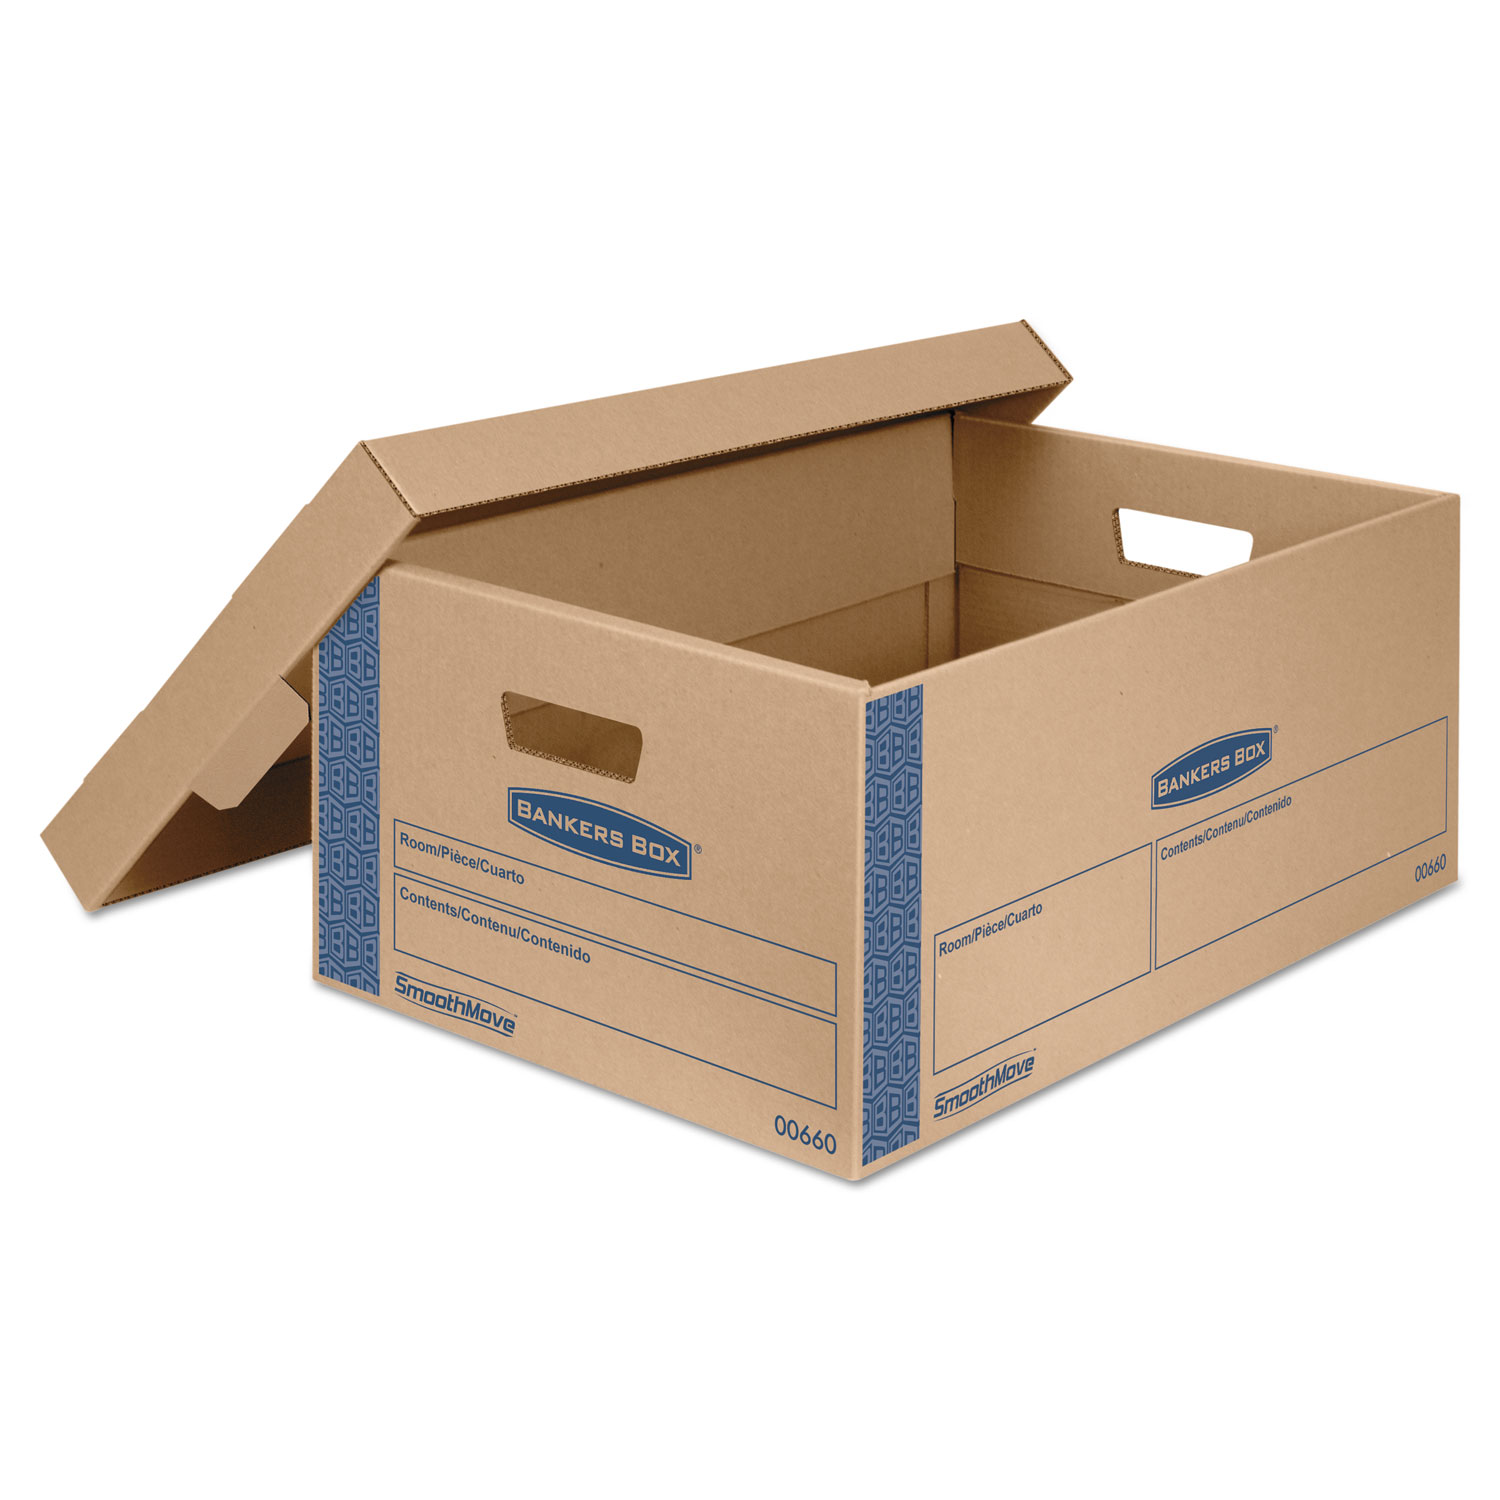  Bankers Box 0066001 SmoothMove Prime Moving & Storage Boxes, Large, Half Slotted Container (HSC), 24 x 15 x 10, Brown Kraft/Blue, 8/Carton (FEL0066001) 